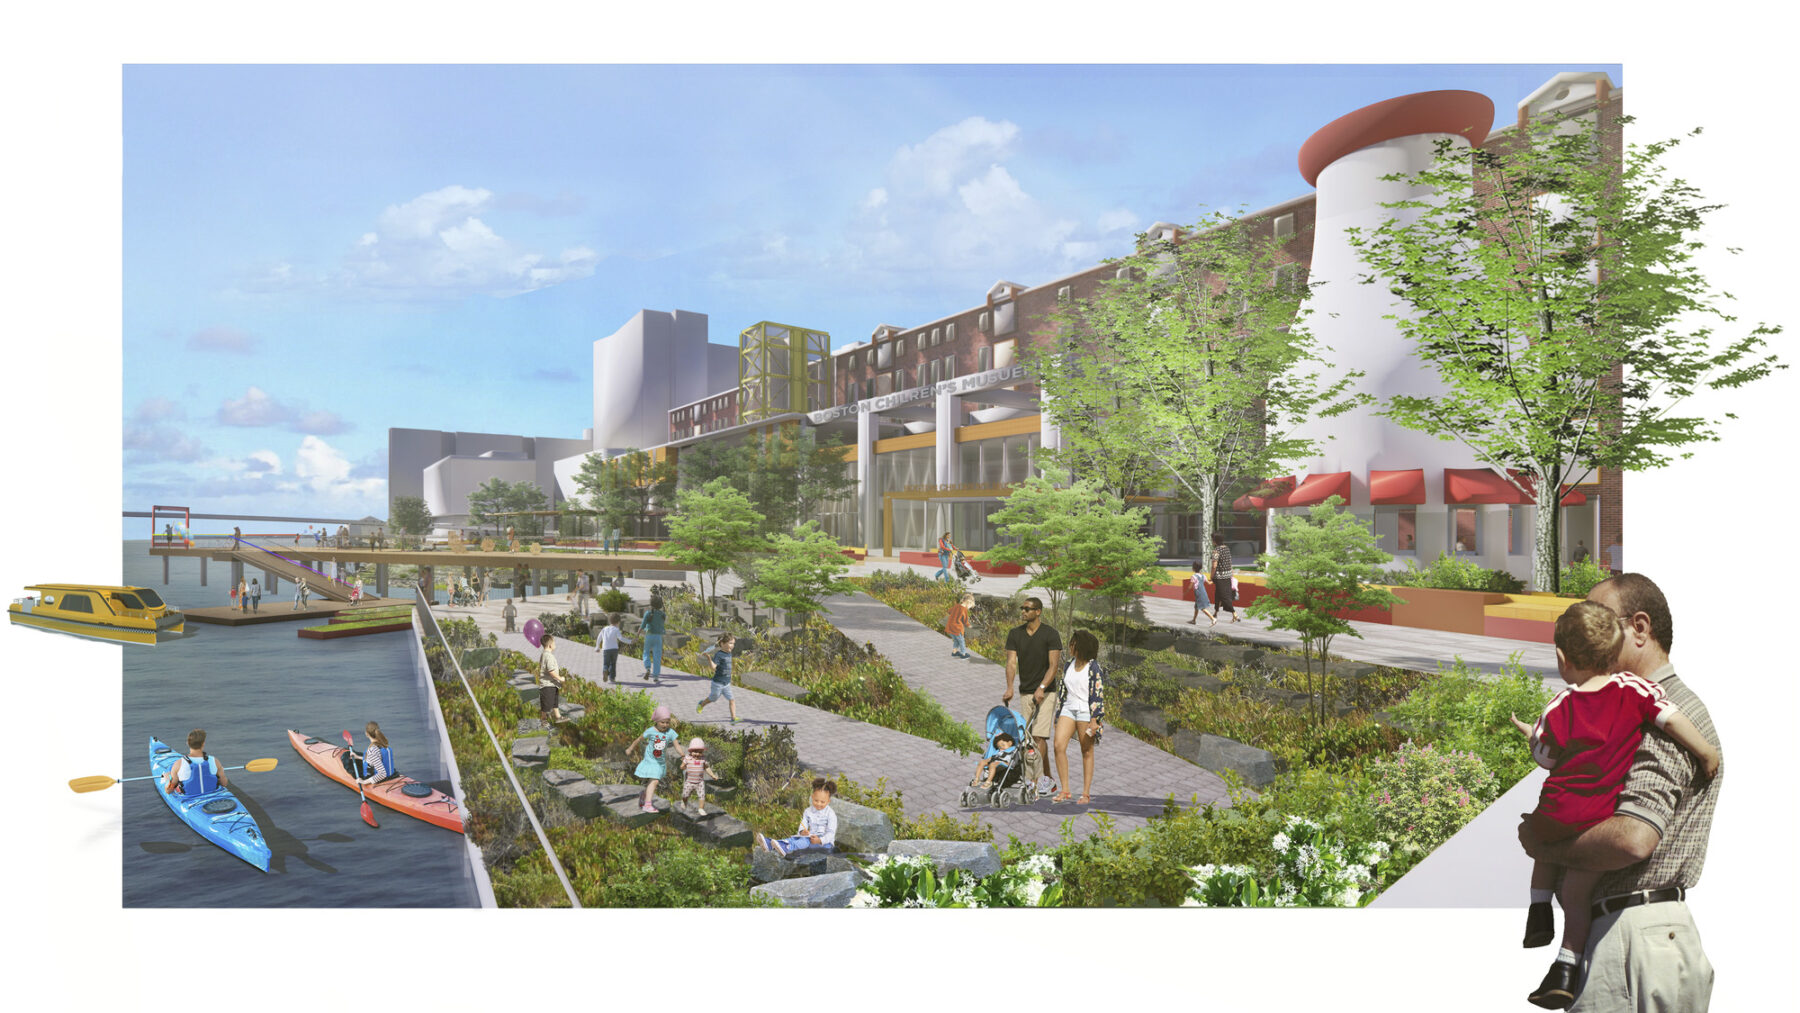 rendering of waterfront master plan with children walking along boardwalk, boats in the water, and native vegetation